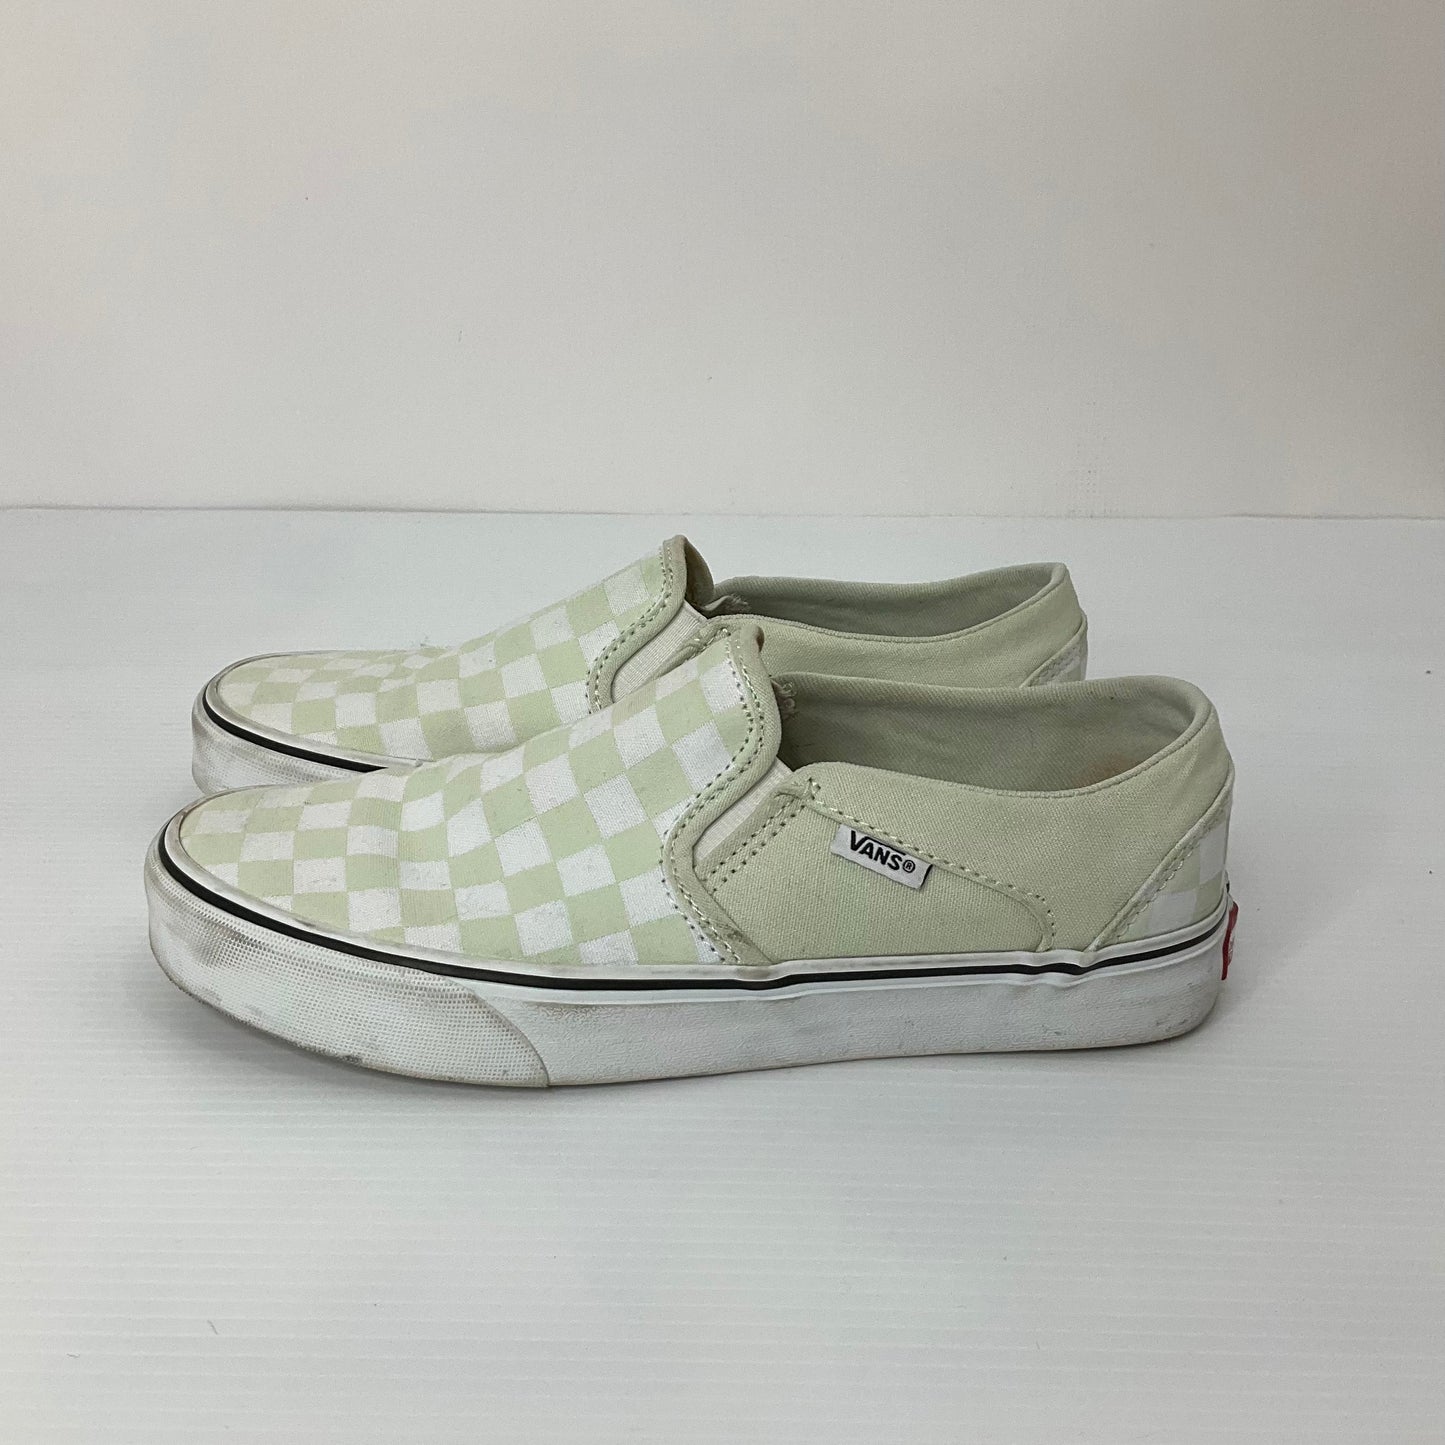 Checkered Pattern Shoes Flats Vans, Size 7